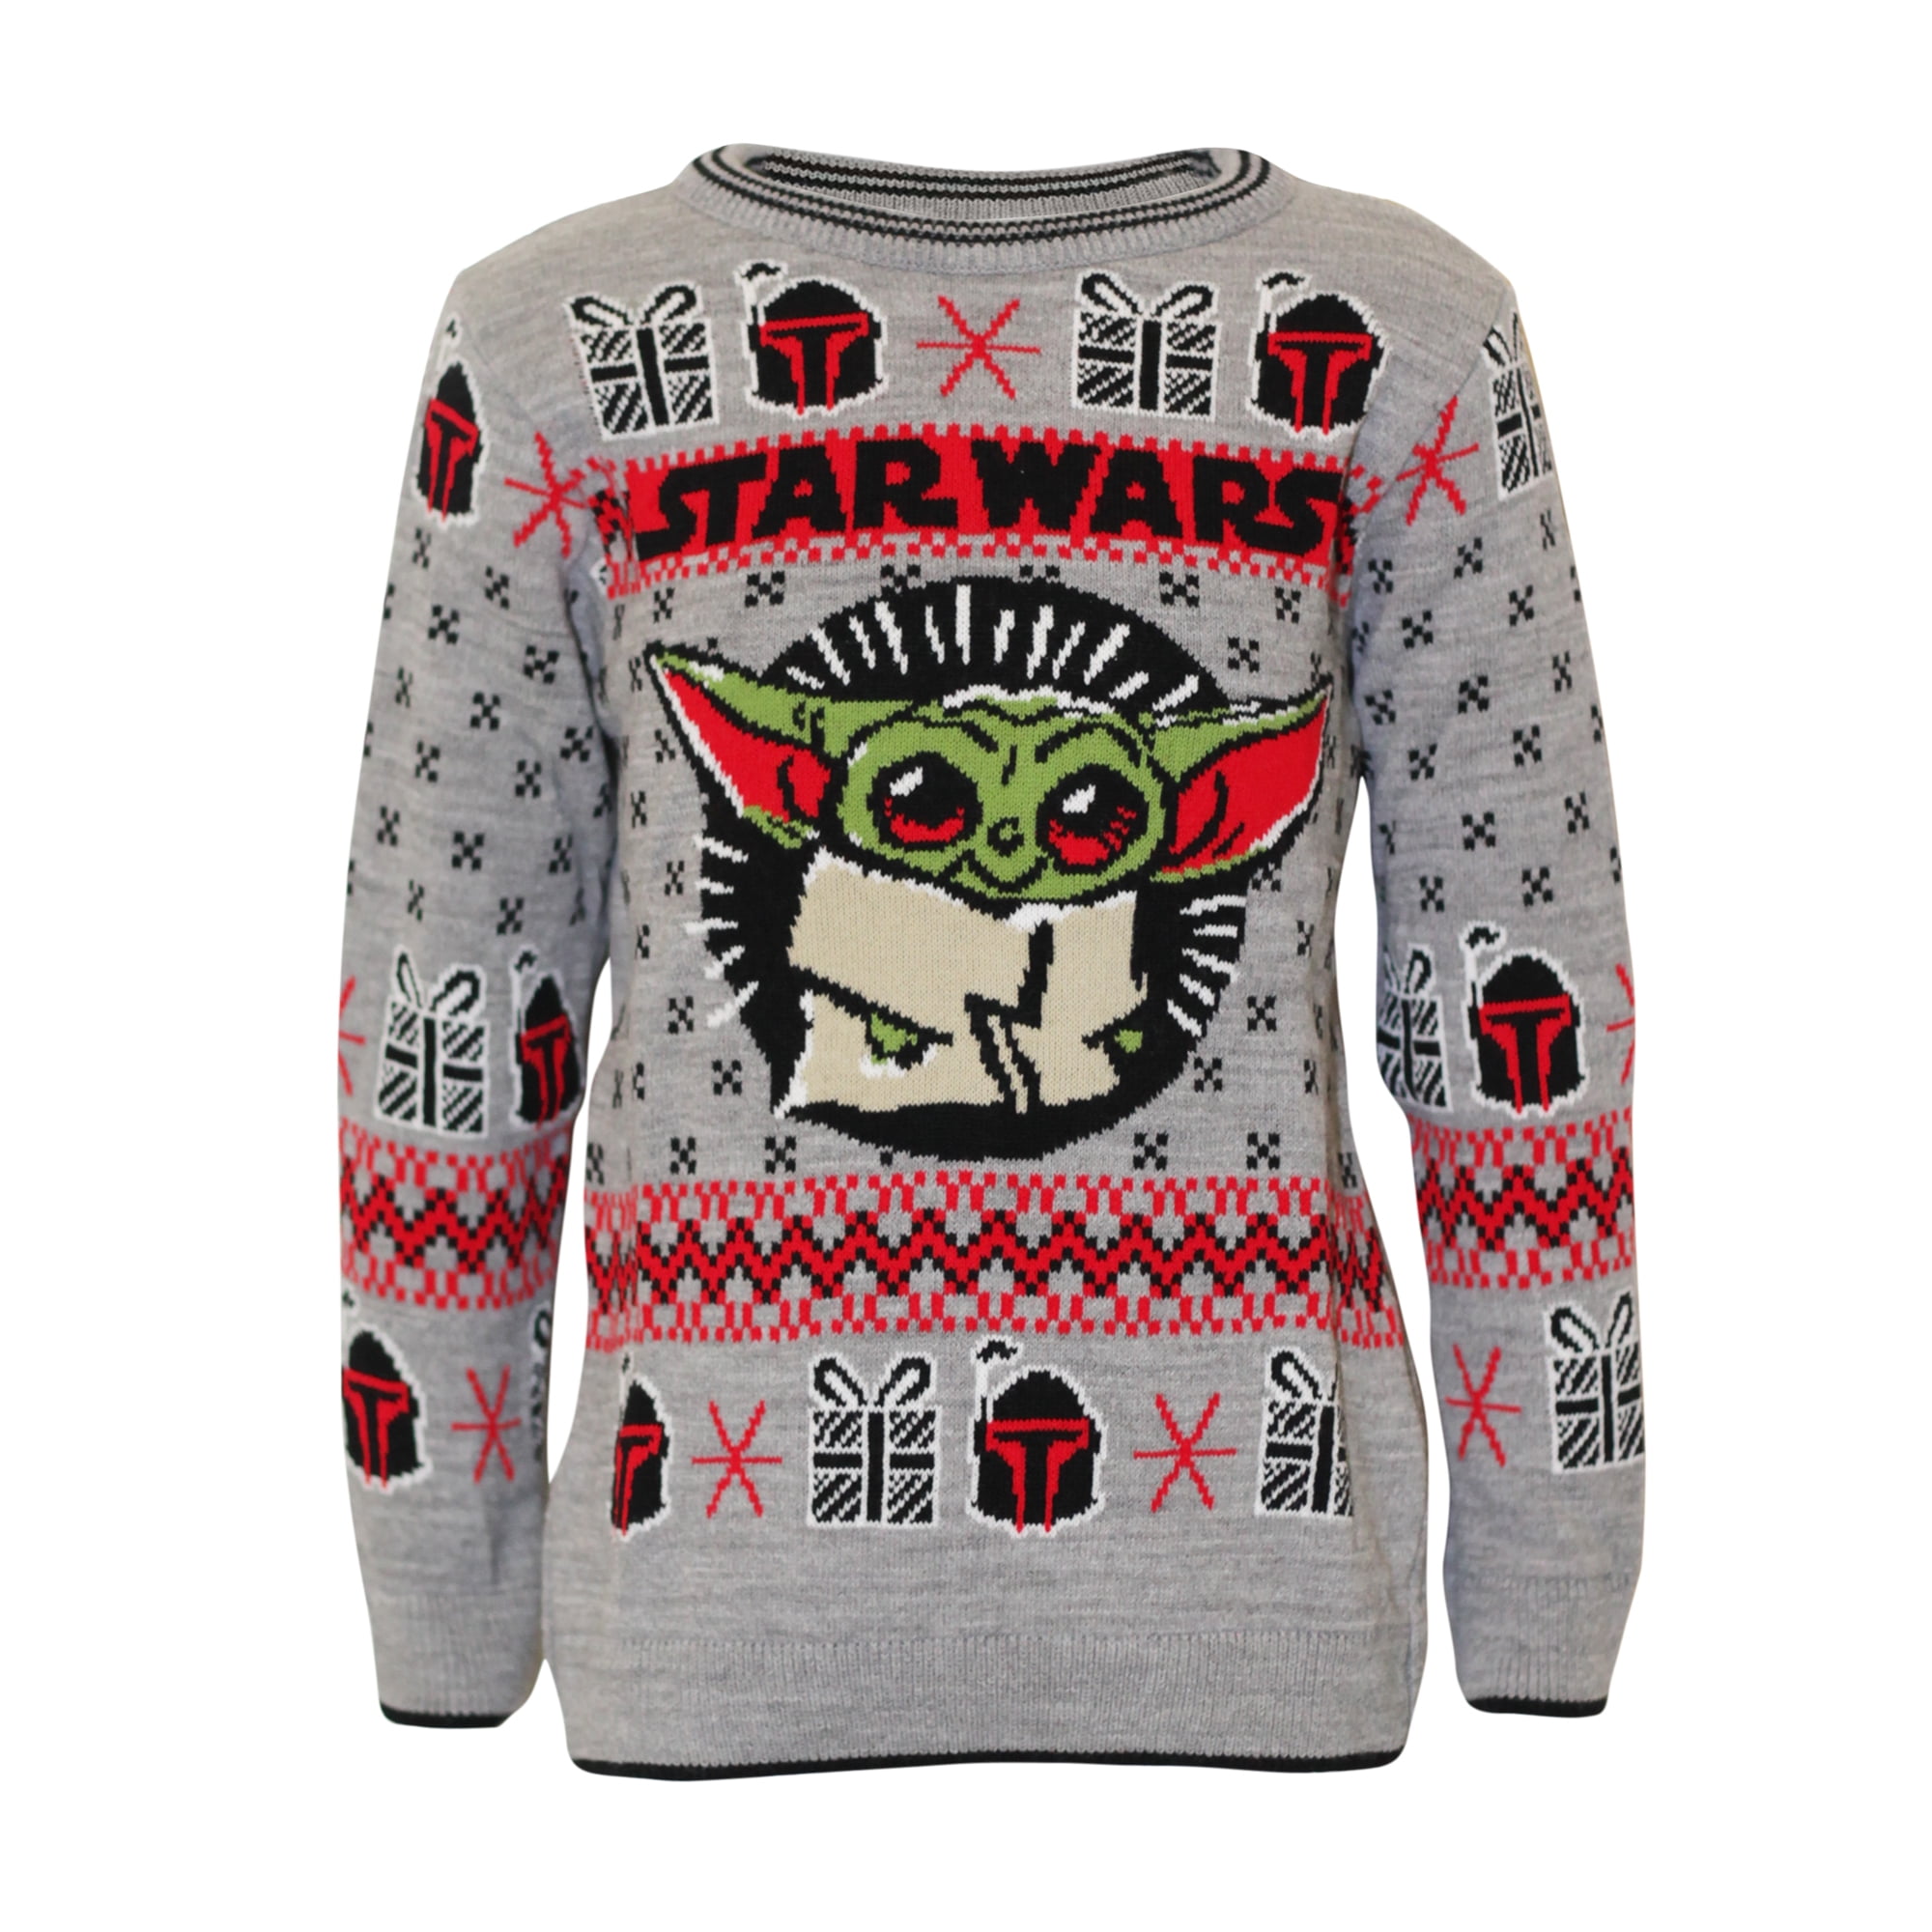 Baby Yoda Xmas Jumper Ugly Sweater Fair Isle Star Wars The Mandalorian The Child Christmas Boys Knitted Jumper Official Merchandise 